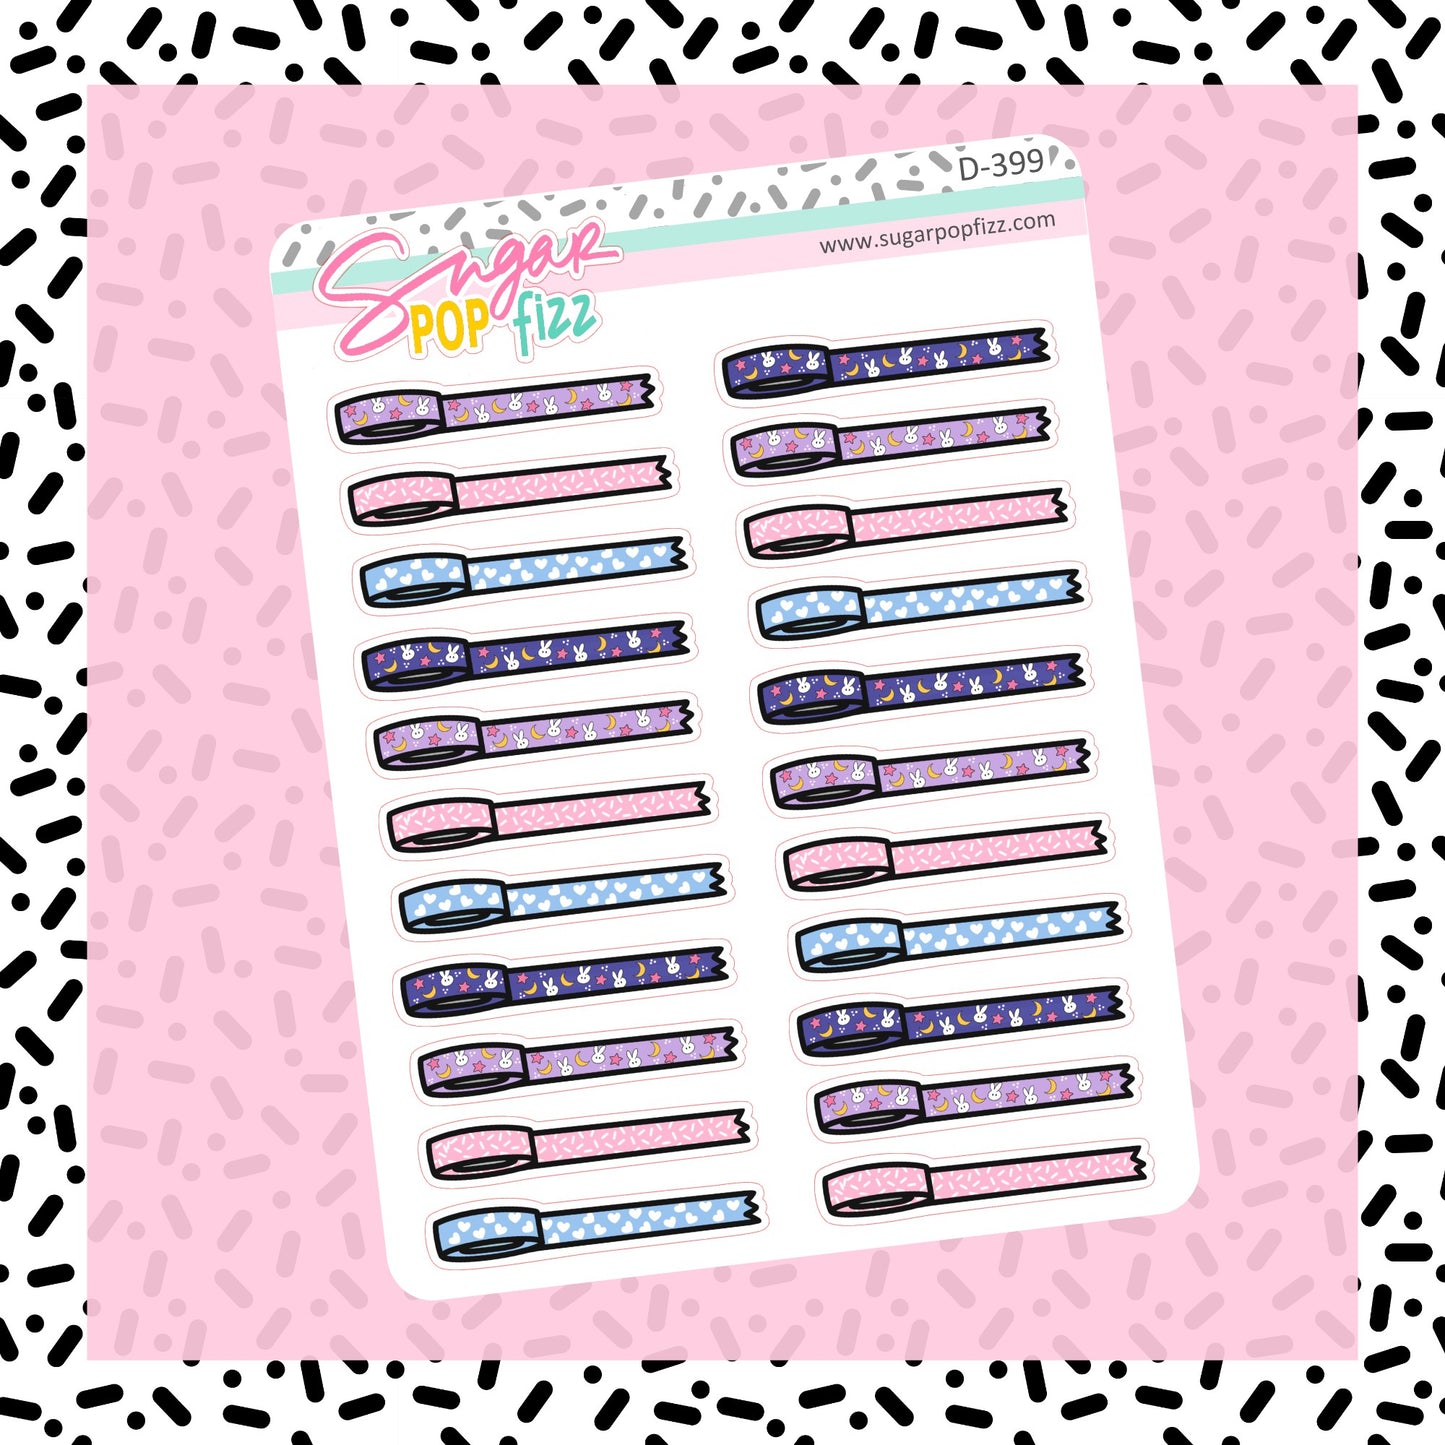 Moonie Washi Roll Divider Doodle Stickers - D399